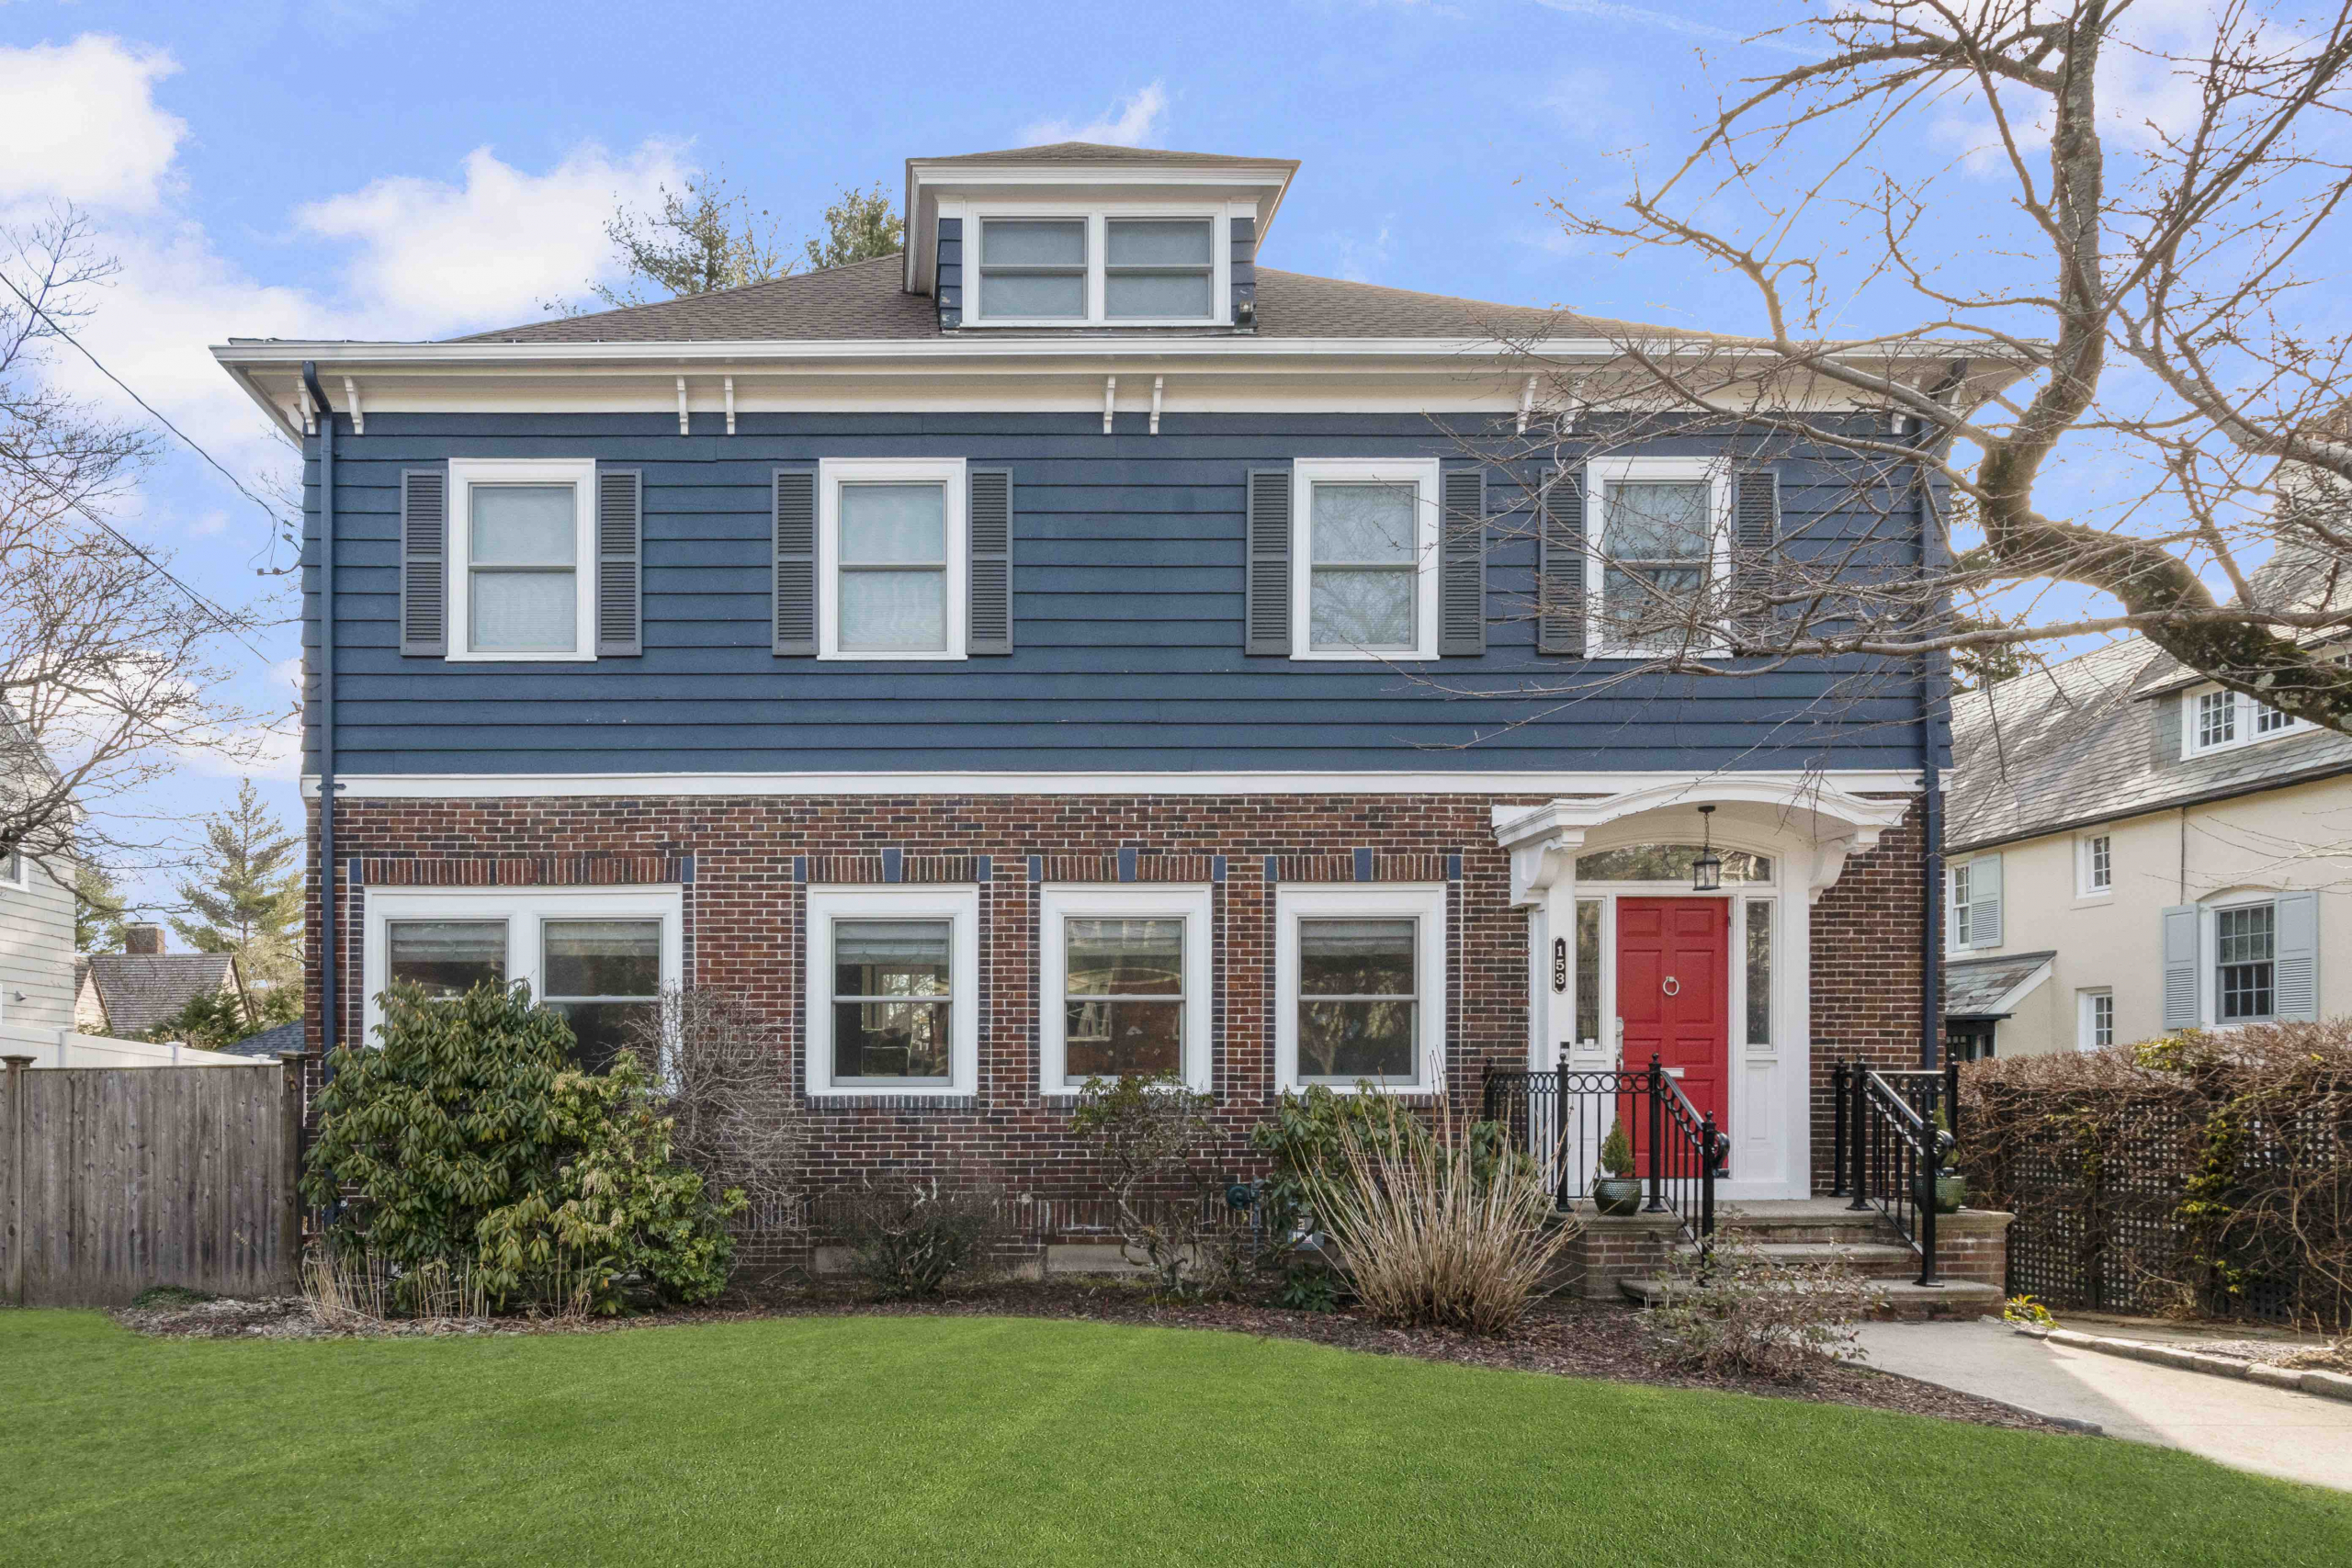 REBECCA MAYER OF COMPASS SELLS MOSES BROWN COLONIAL FOR $1,550,000